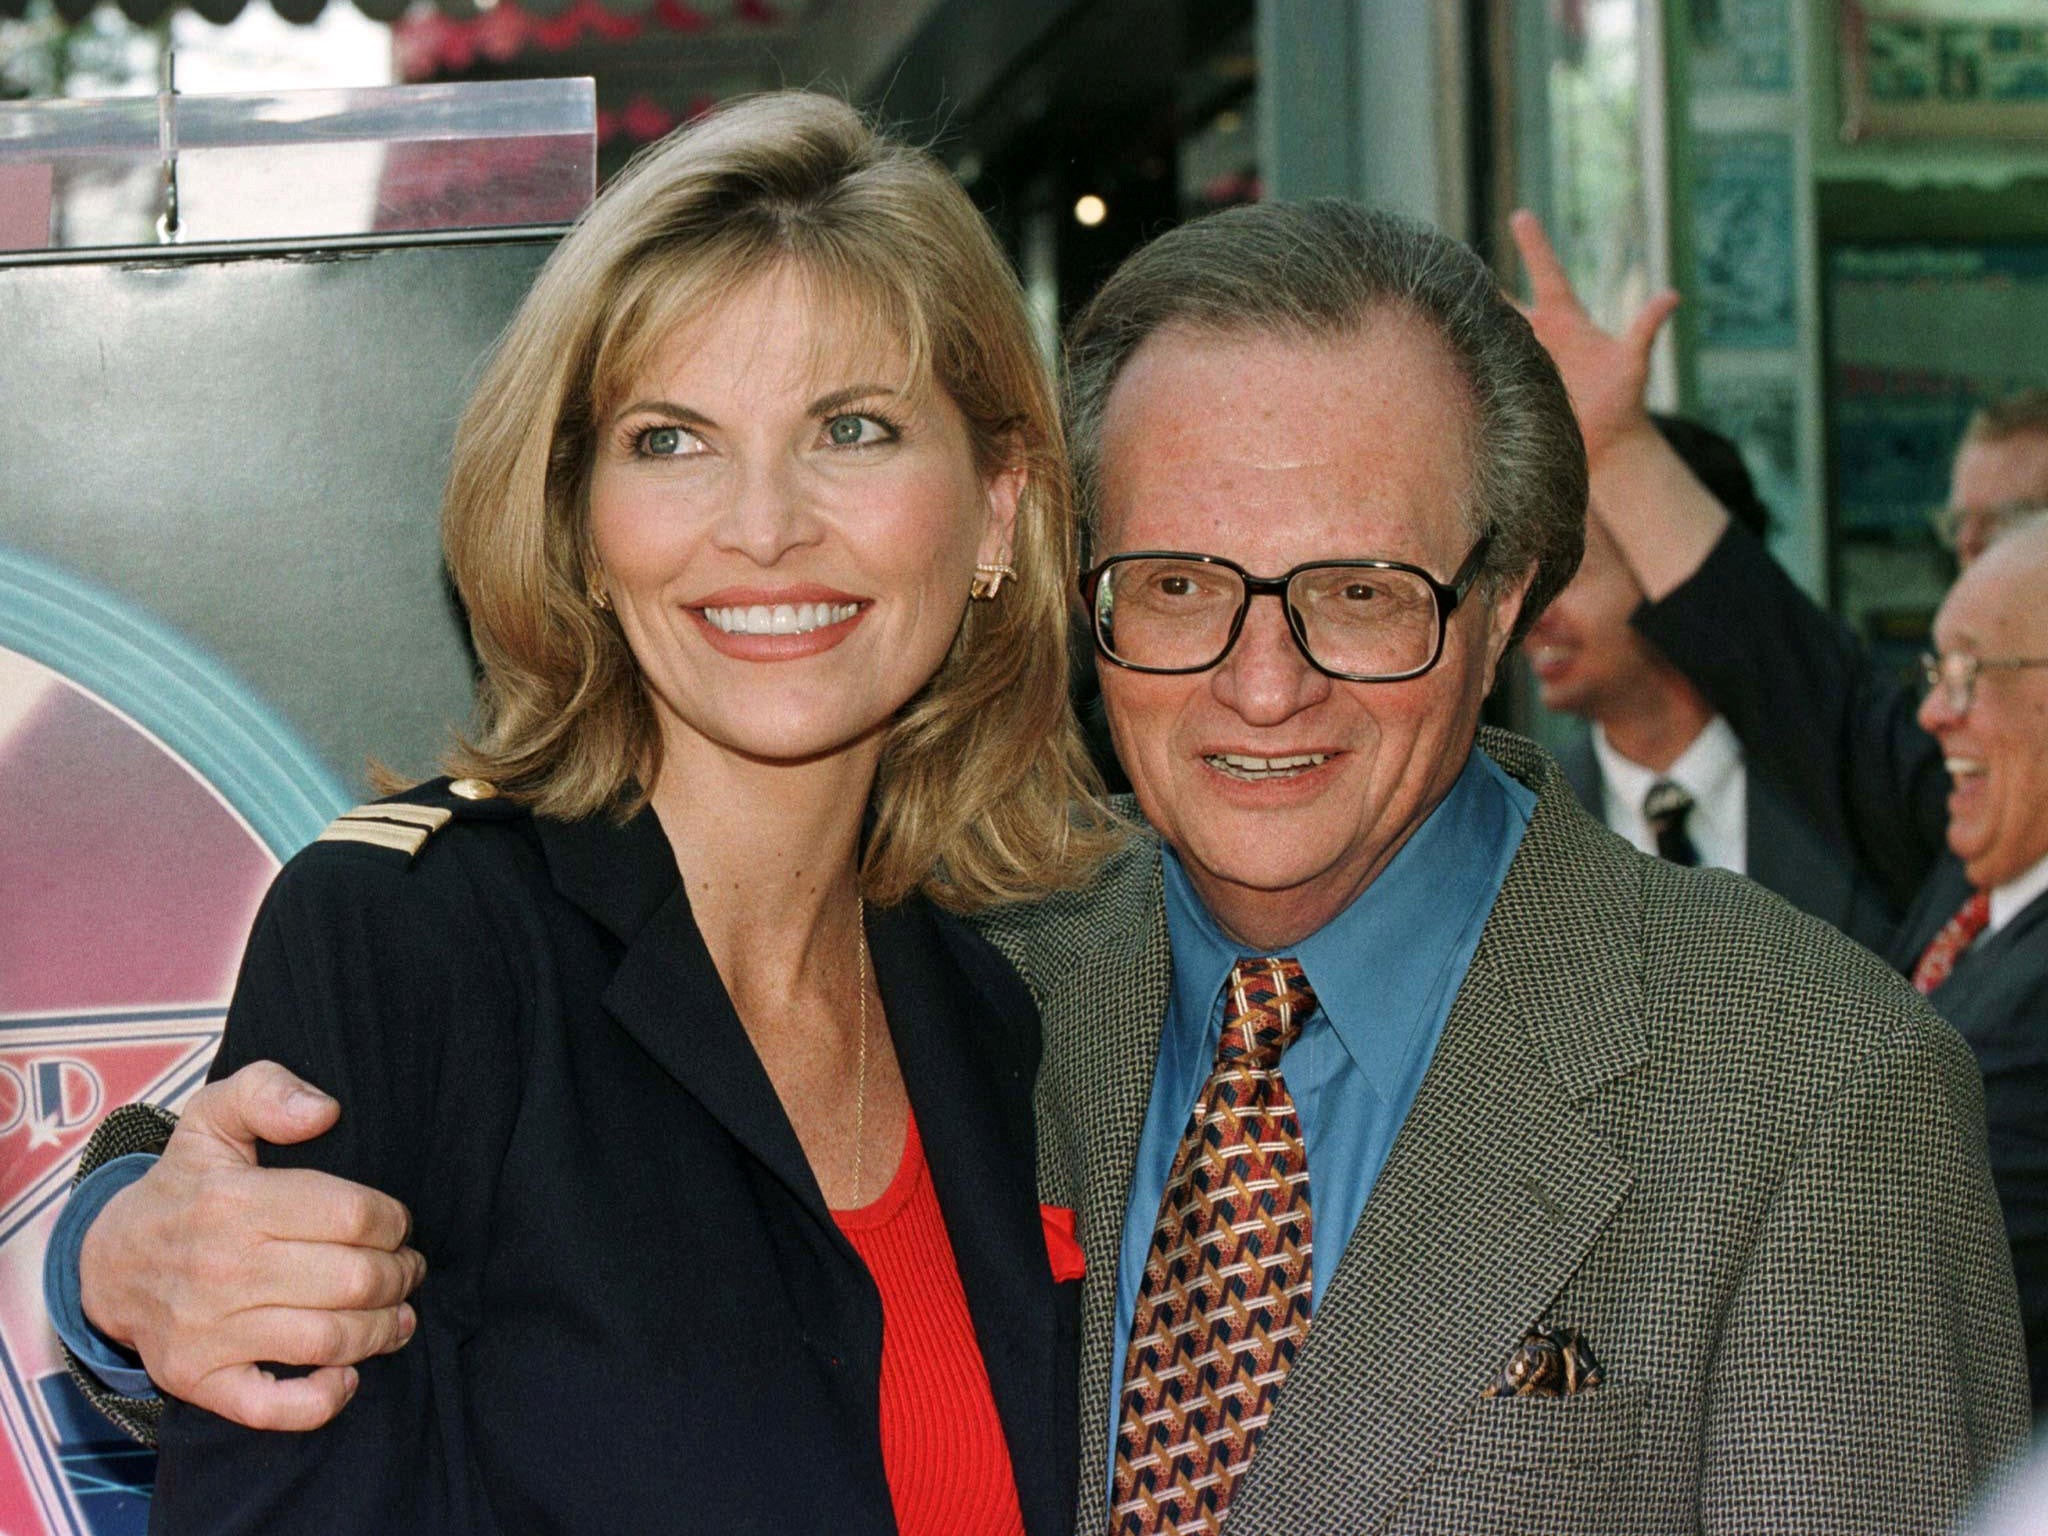 King poses with Shawn Southwick in 1997 at the unveiling of his star on the Hollywood Walk of Fame